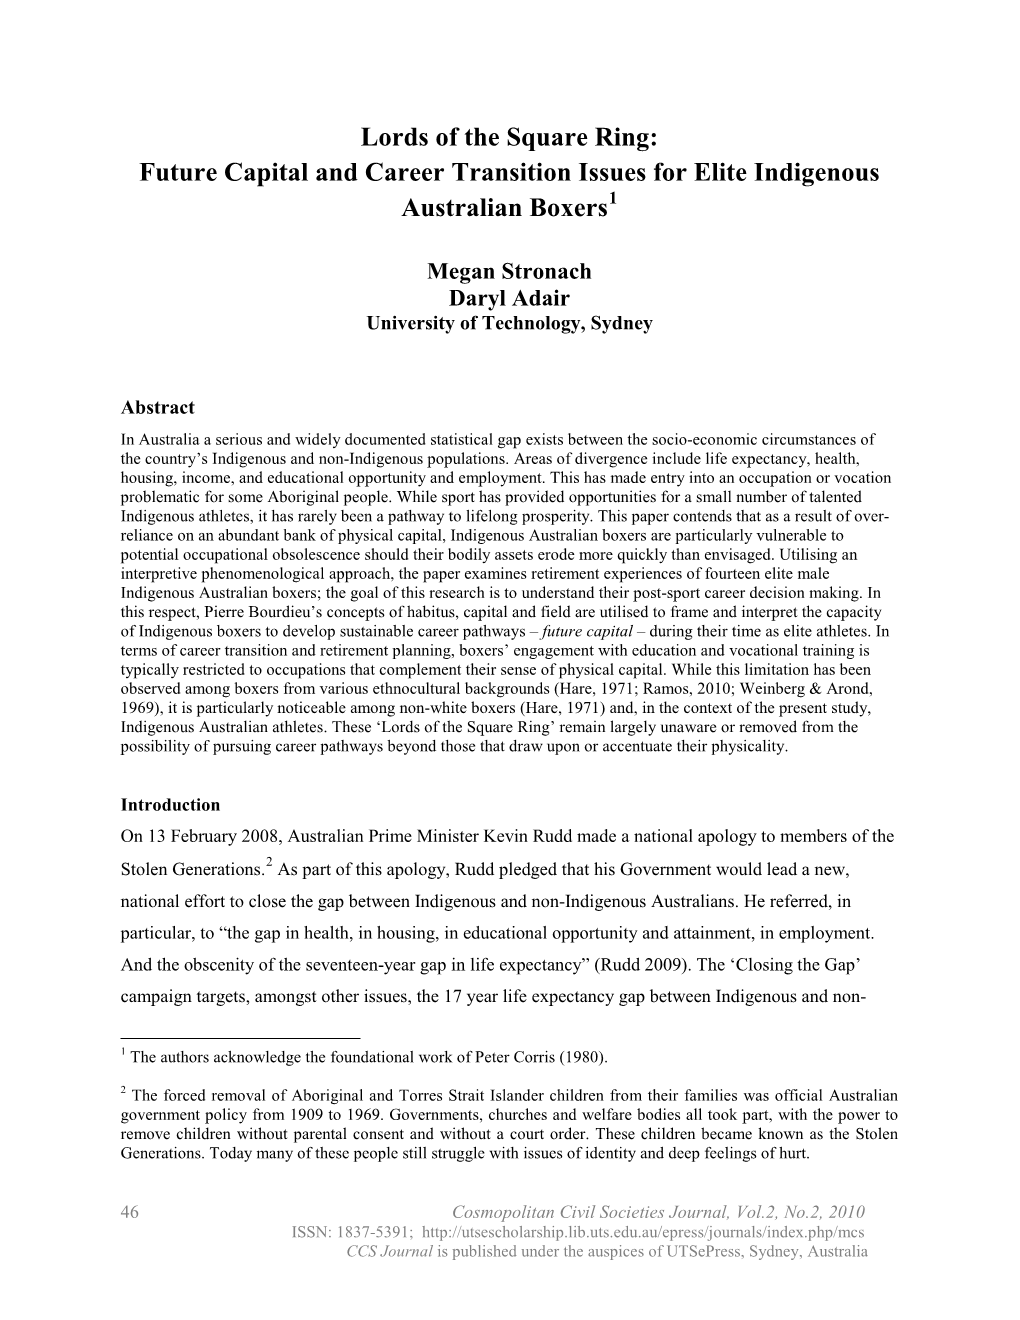 Future Capital and Career Transition Issues for Elite Indigenous Australian Boxers1